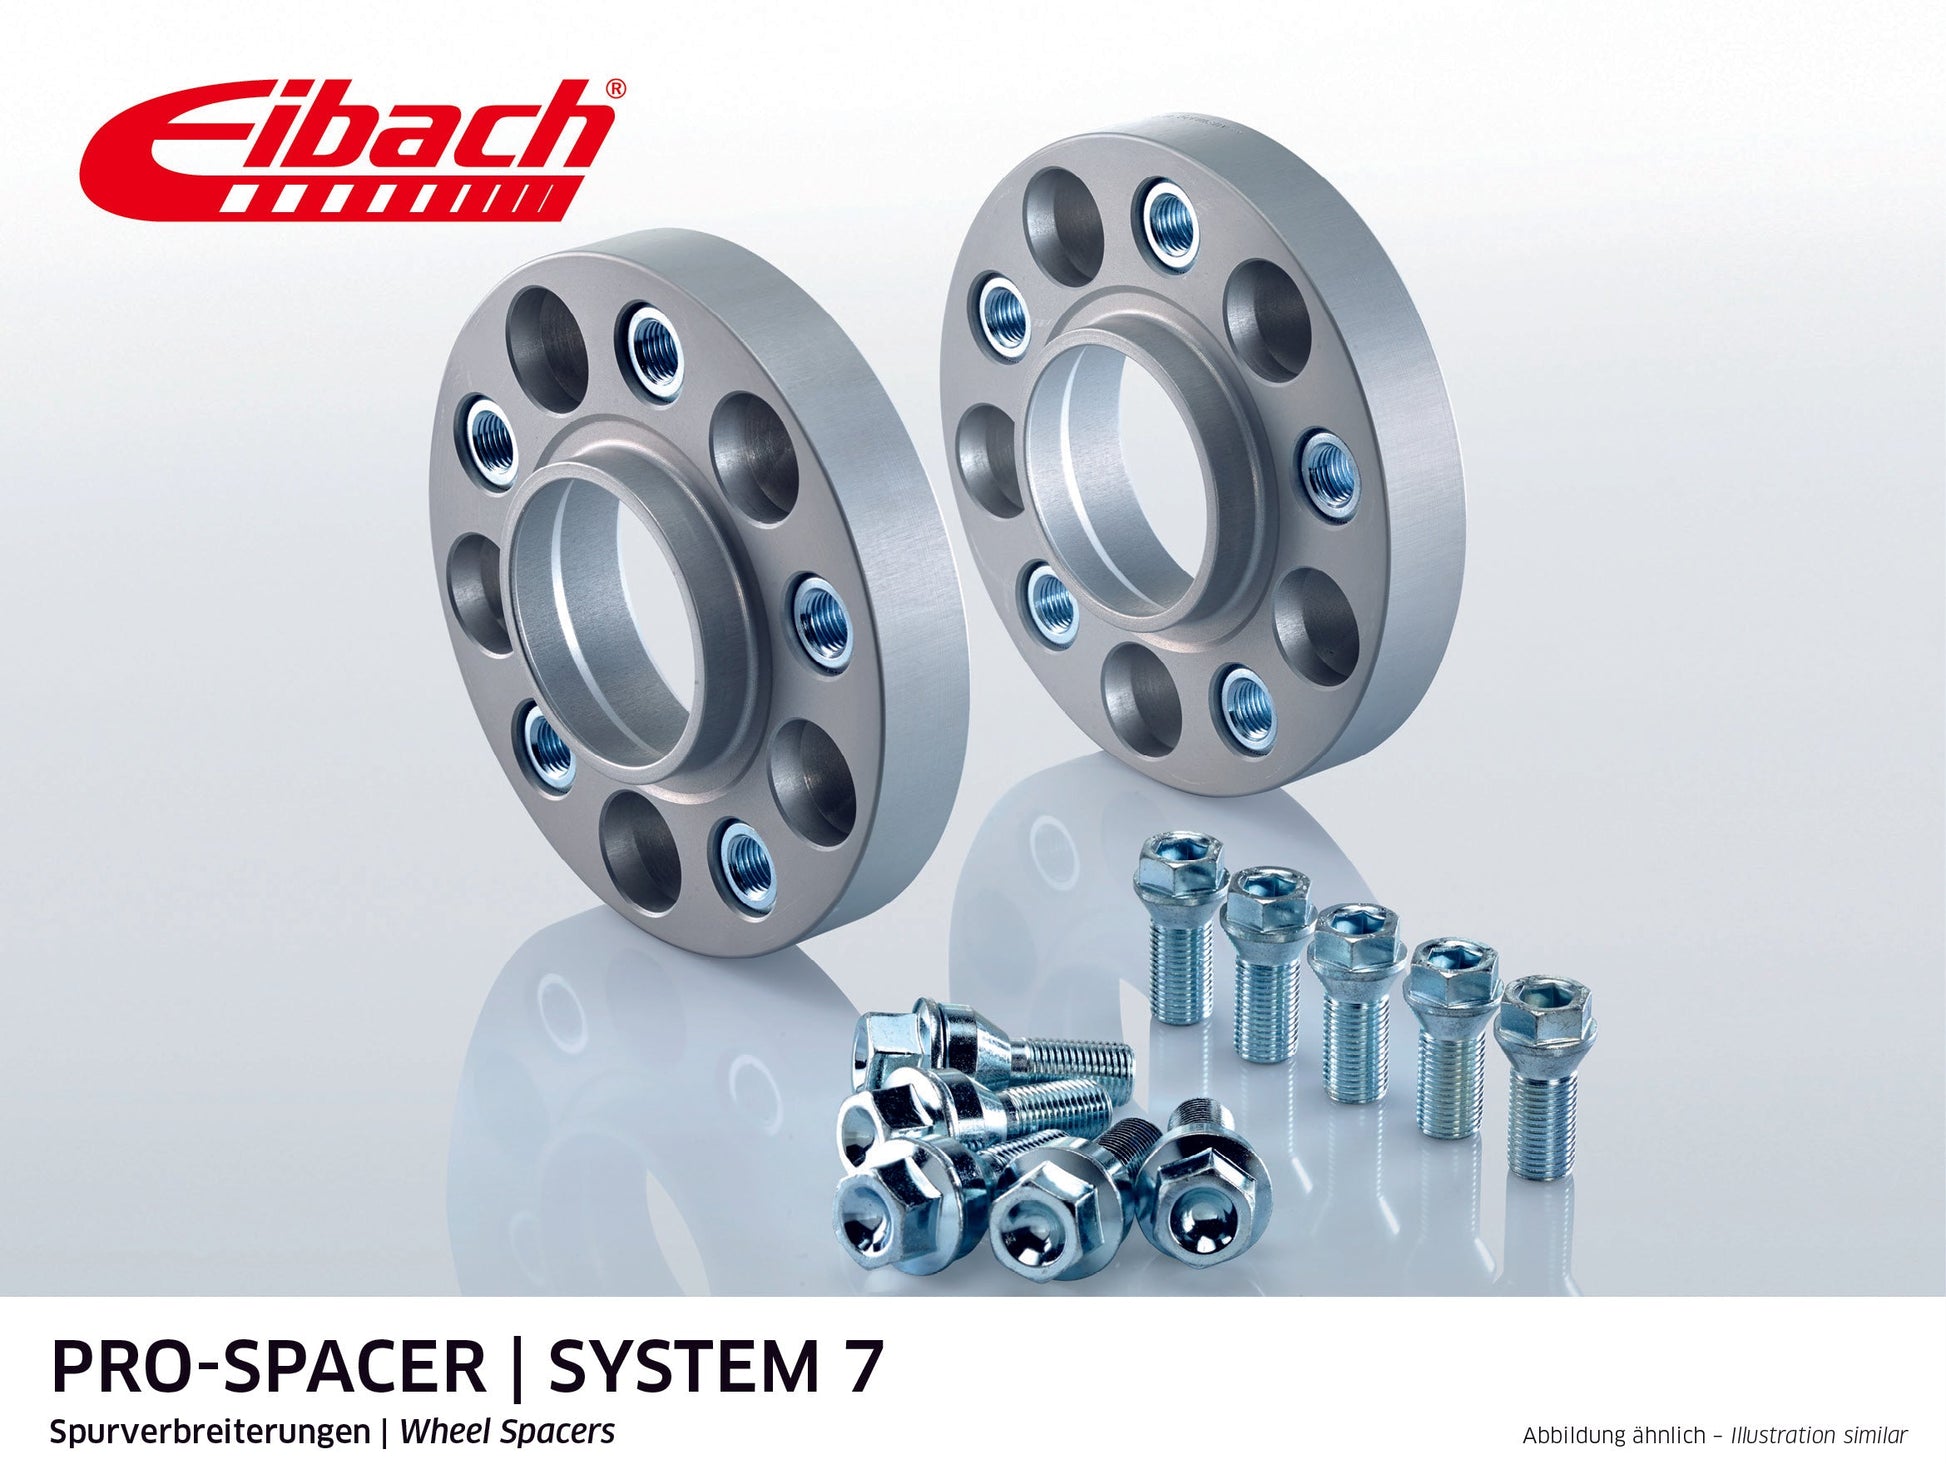 Eibach Pro-Spacer Kit (Pair Of Spacers) 30mm Per Spacer (System 7) S90-7-30-032 (Silver) at £175.85